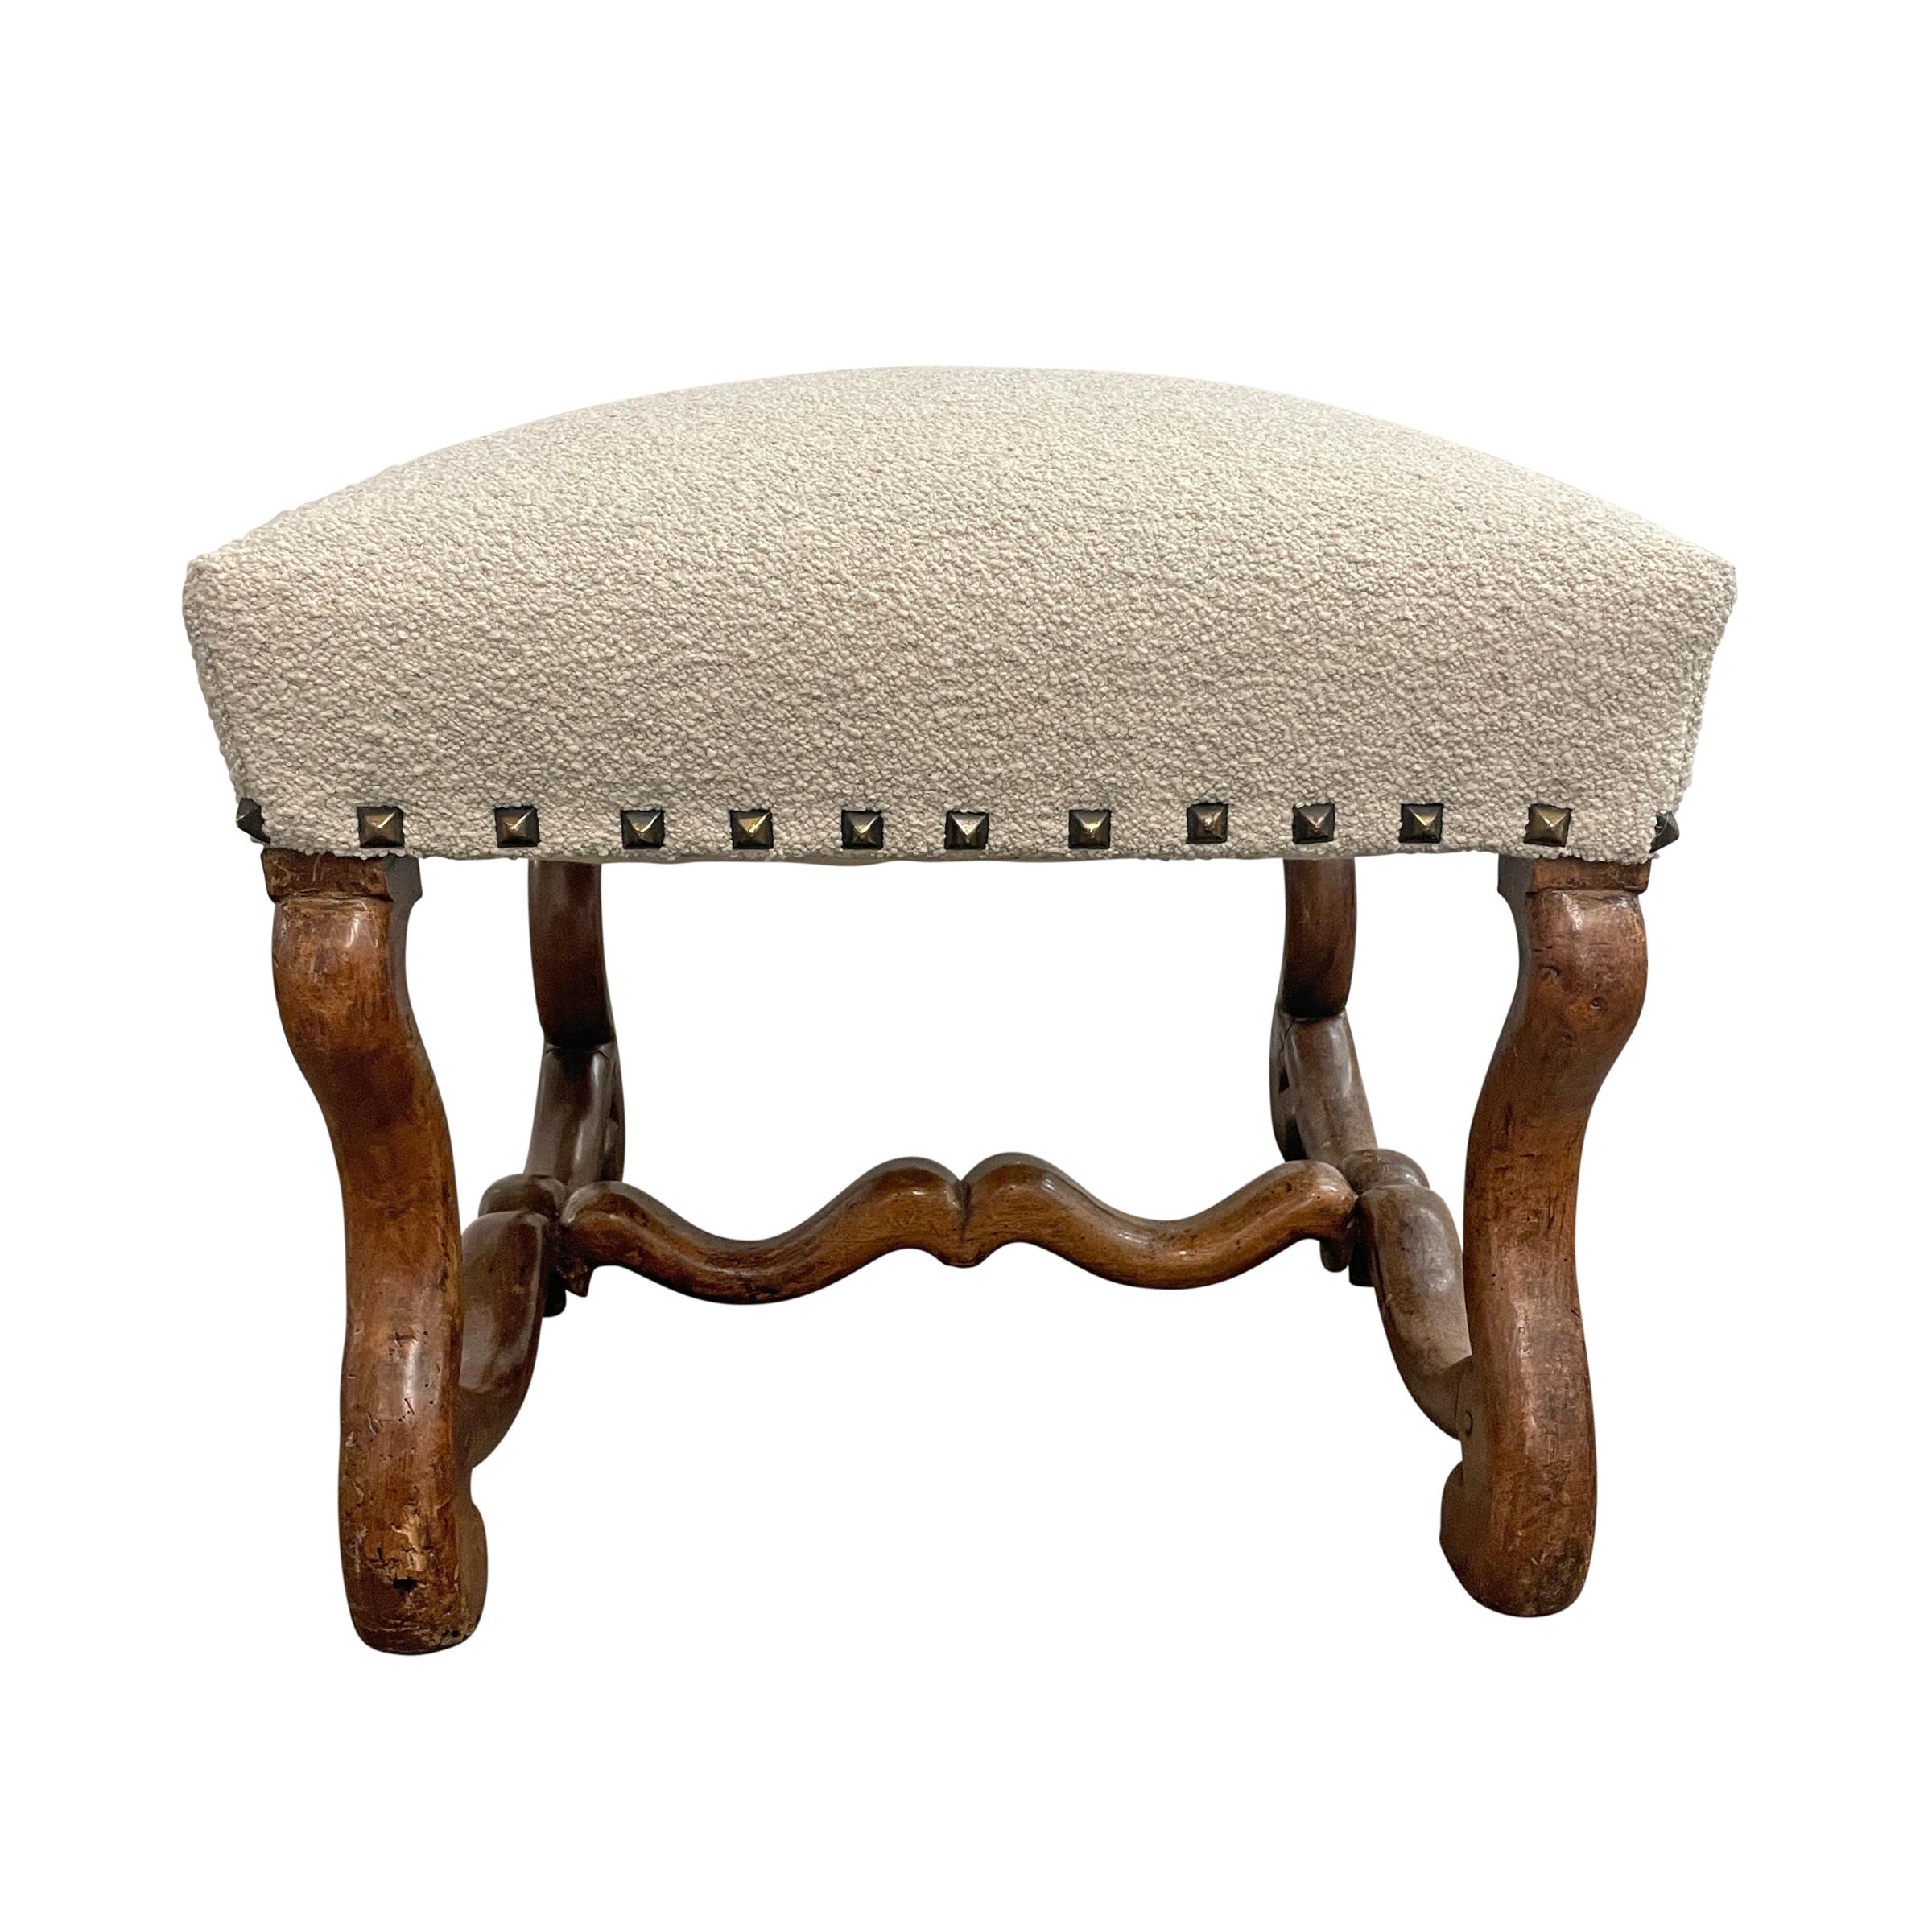 18th Century and Earlier 17th Century French Louis XIII Os-de-mouton Stool For Sale